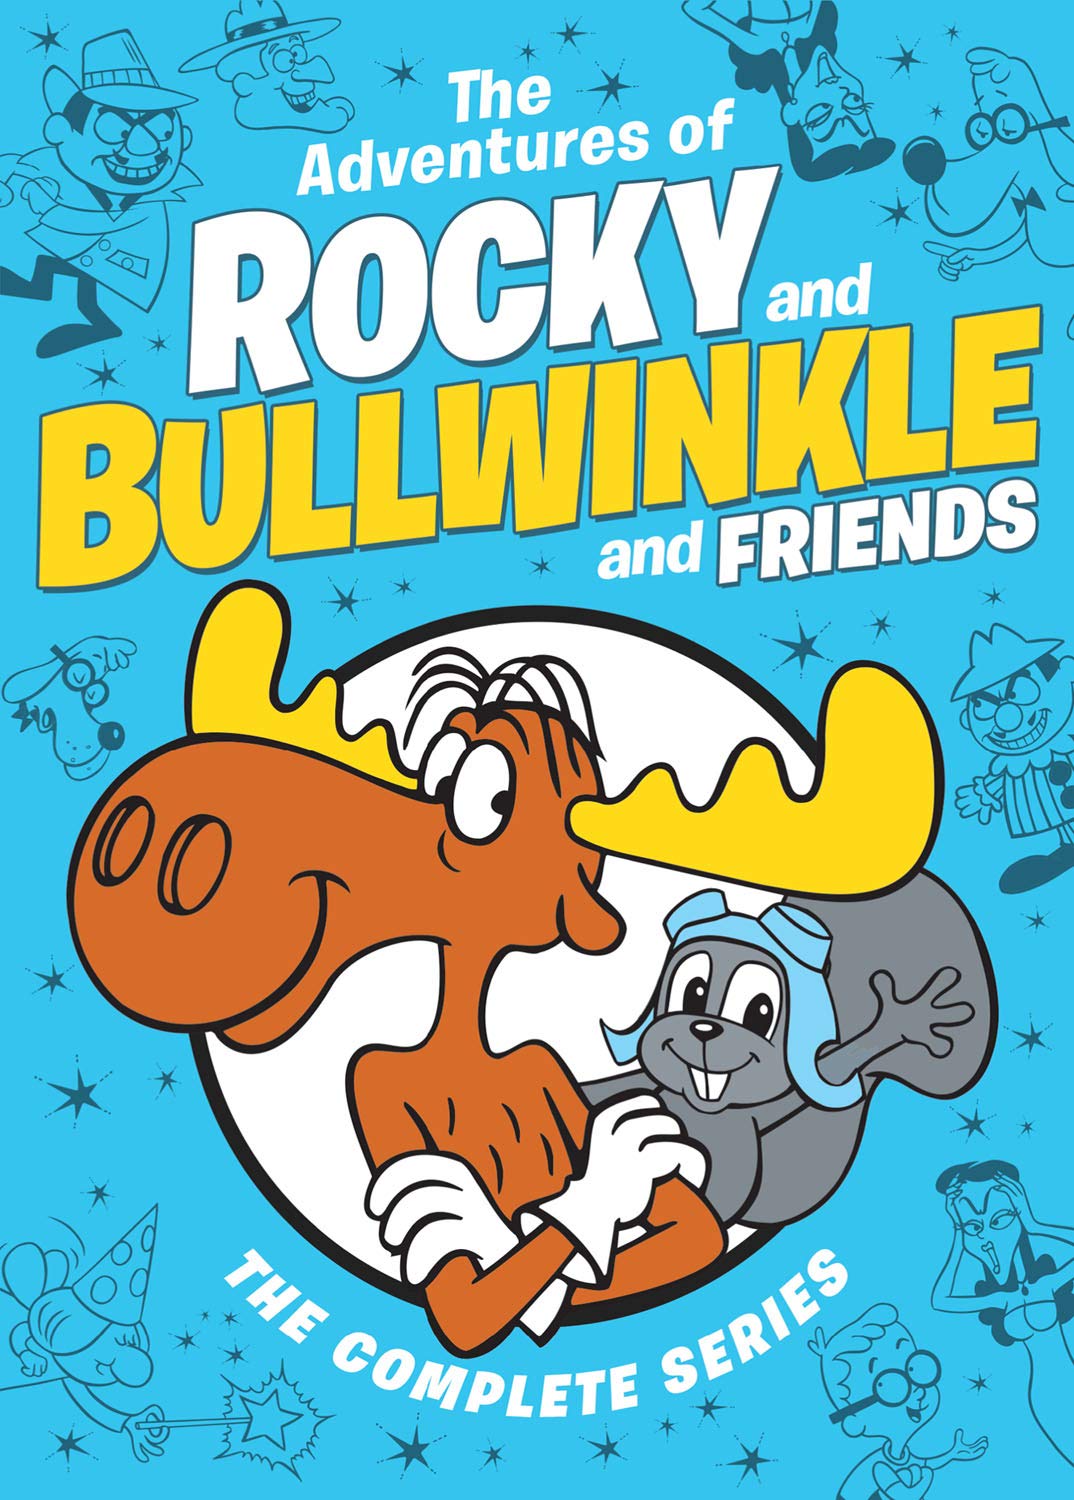 $18.99 (Prime Members): The Adventures of Rocky and Bullwinkle and Friends: The Complete Series (DVD)